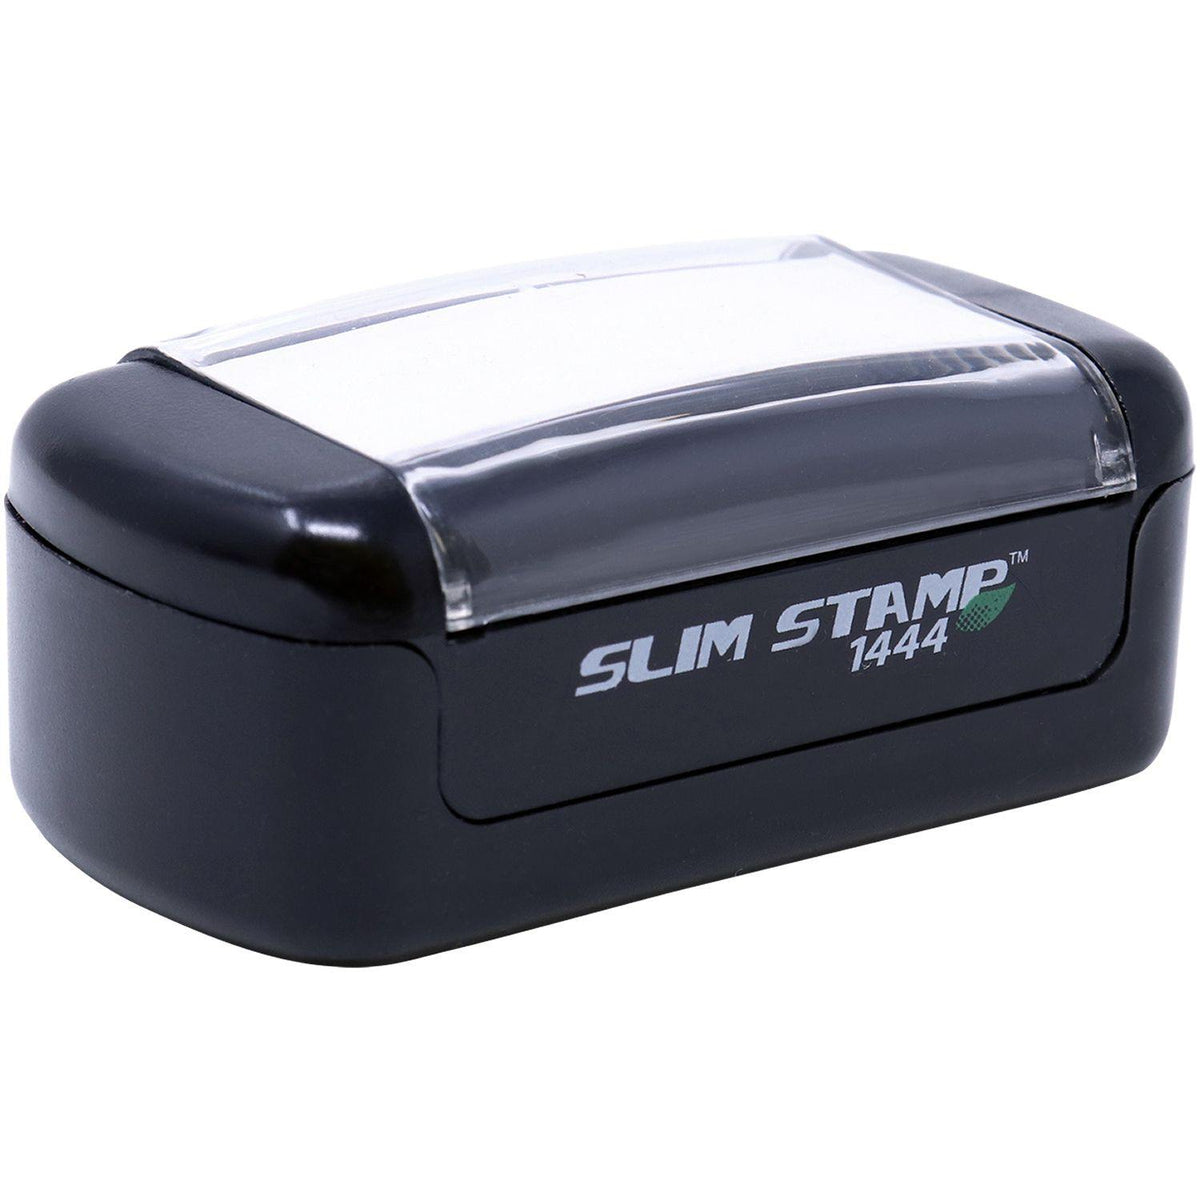 Slim Pre Inked Caution Stamp - Engineer Seal Stamps - Brand_Slim, Impression Size_Small, Stamp Type_Pre-Inked Stamp, Type of Use_Office